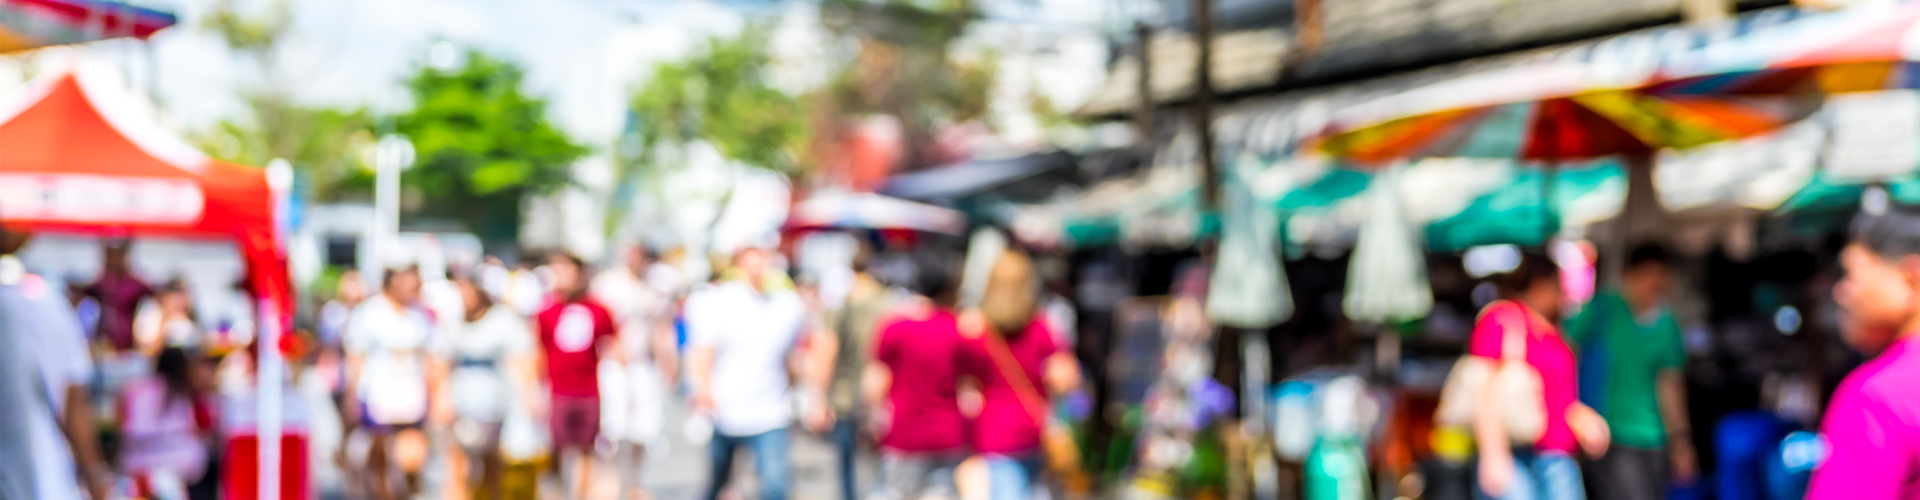 Blurred background : people shopping at market fair in sunny day at Highland Knolls